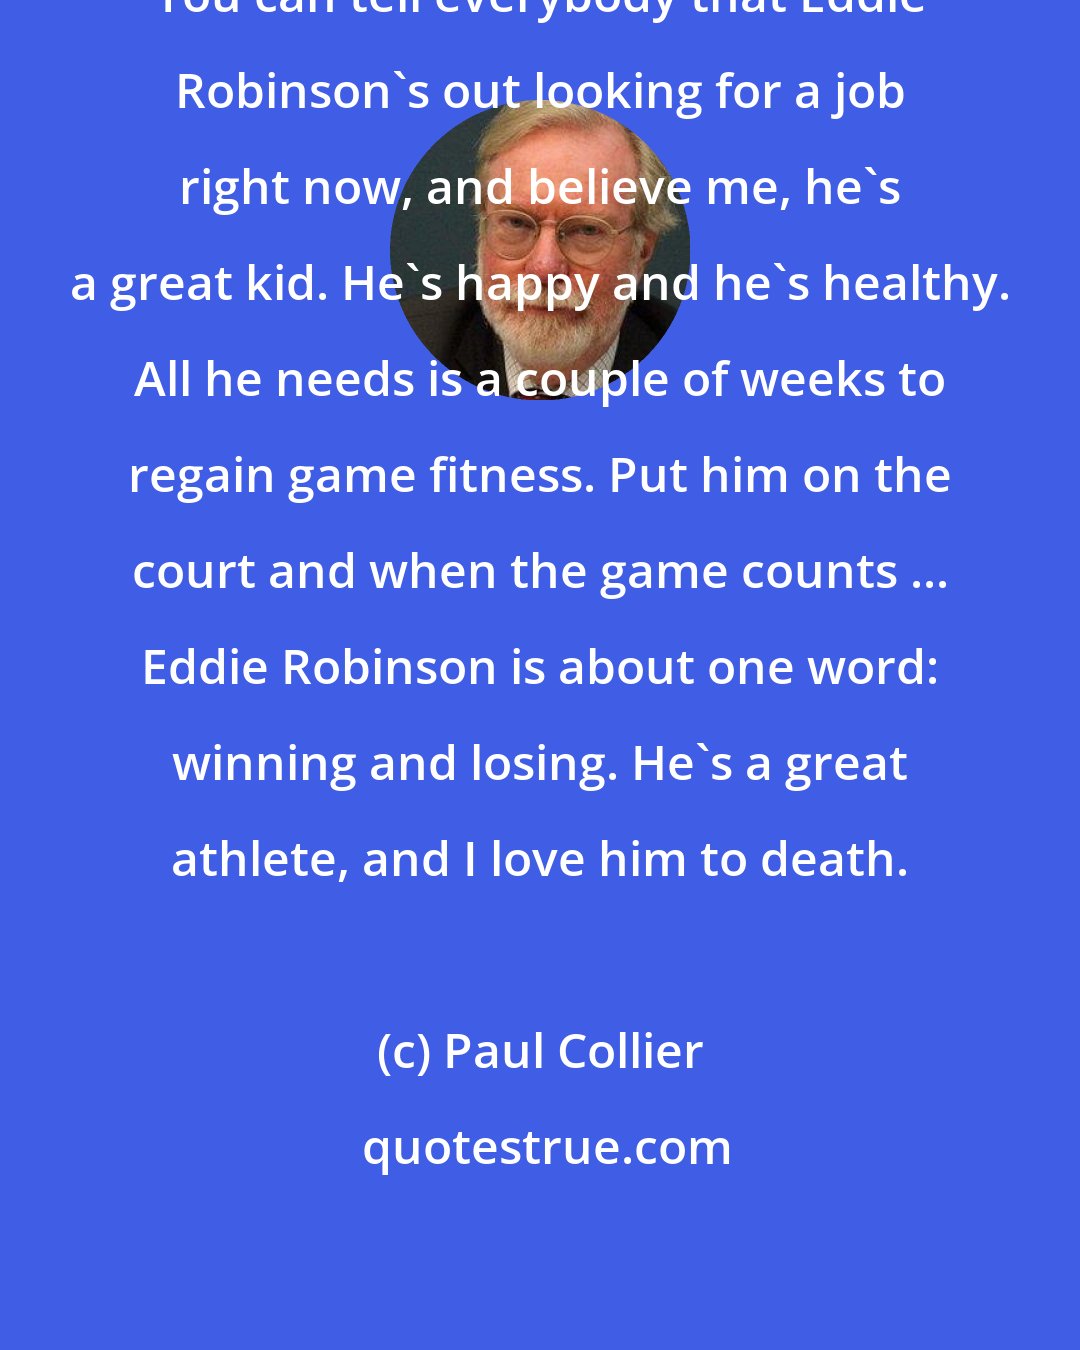 Paul Collier: You can tell everybody that Eddie Robinson's out looking for a job right now, and believe me, he's a great kid. He's happy and he's healthy. All he needs is a couple of weeks to regain game fitness. Put him on the court and when the game counts ... Eddie Robinson is about one word: winning and losing. He's a great athlete, and I love him to death.